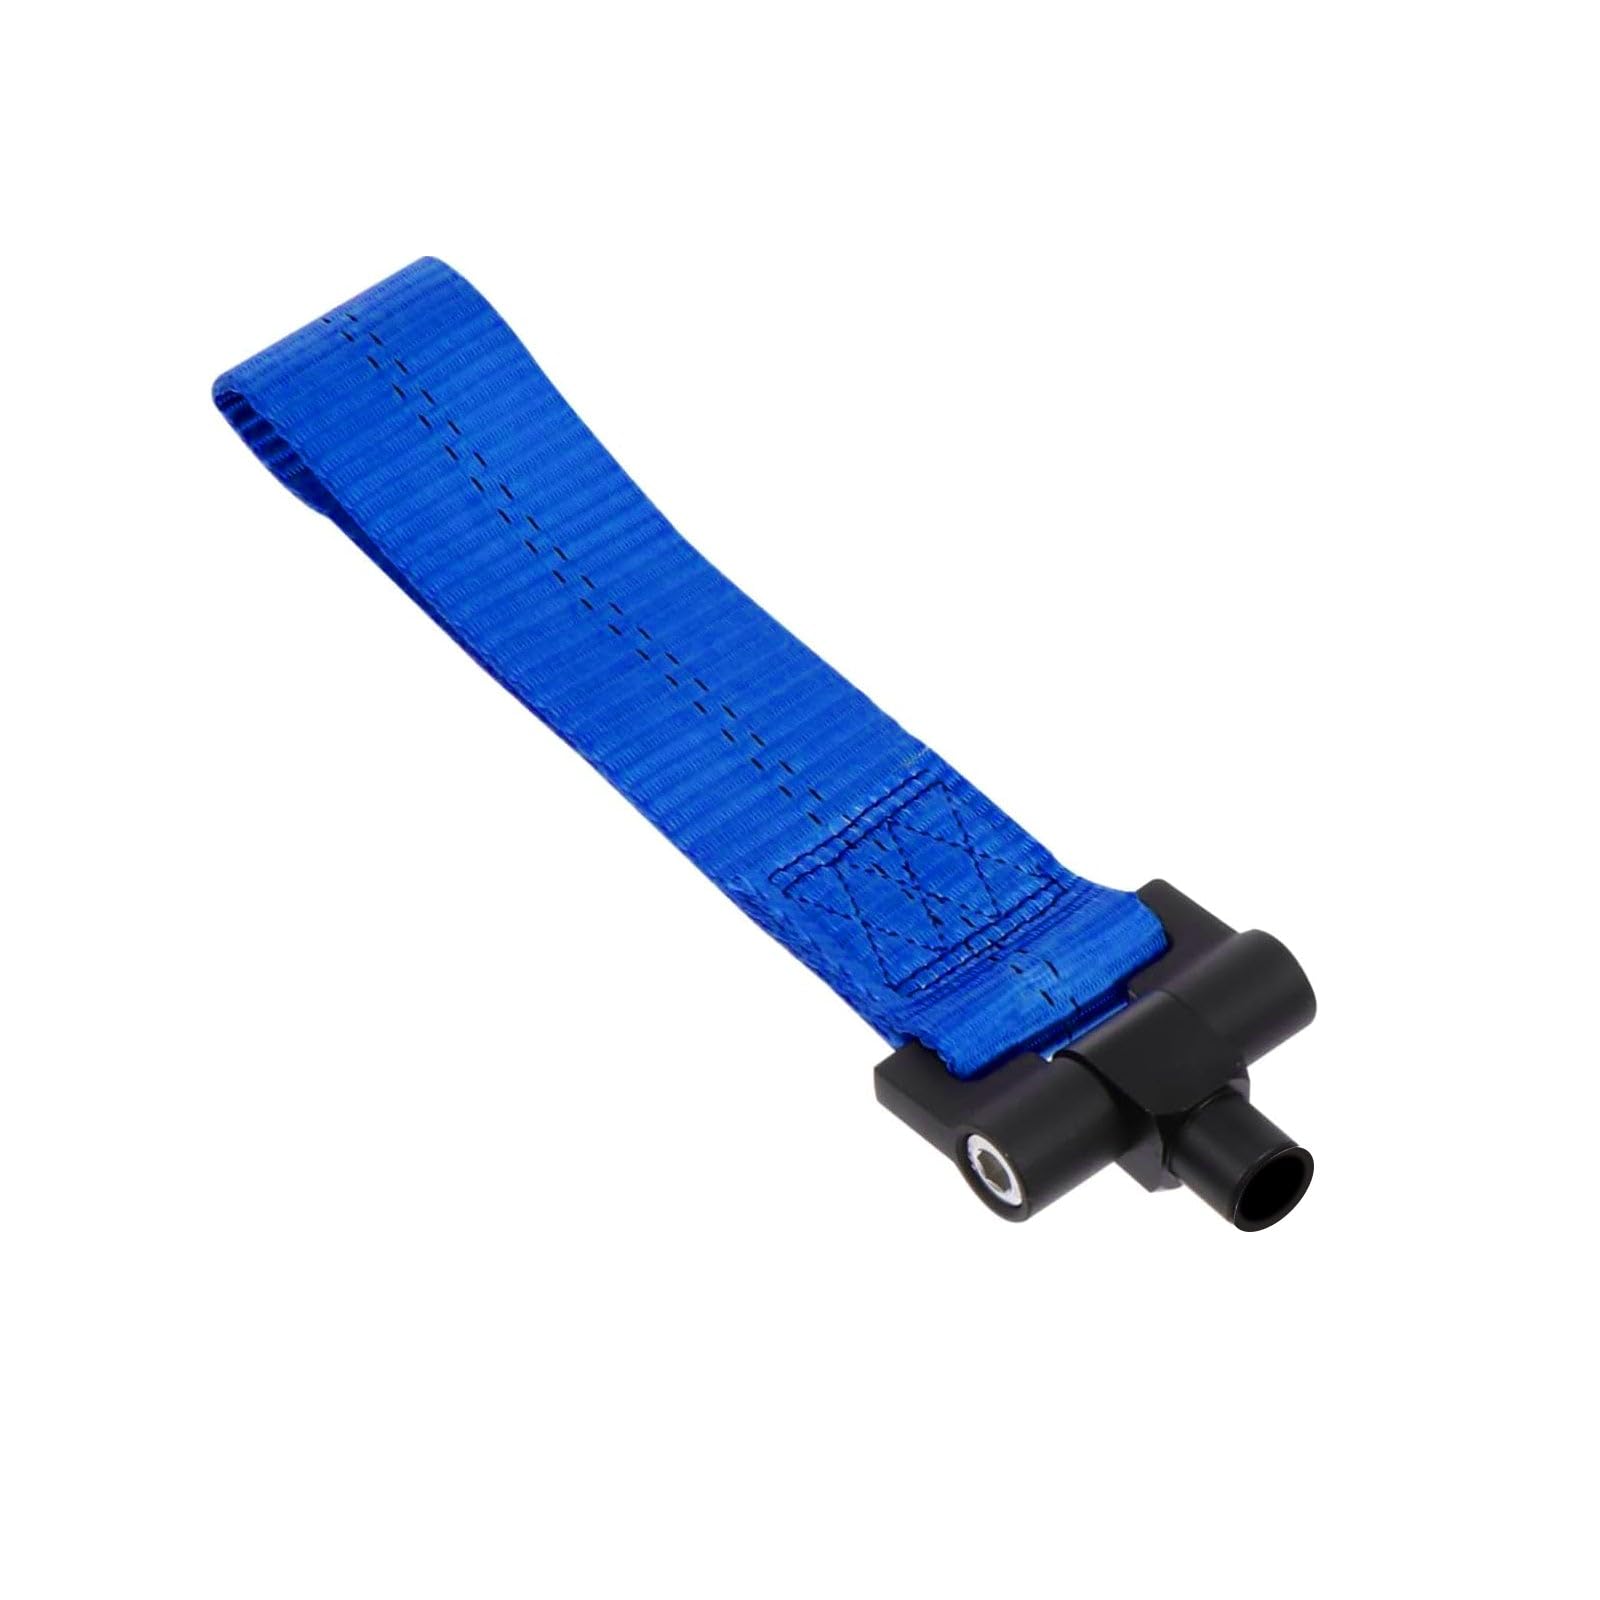 Xotic Tech Blue Track Racing Towing Strap w/Tow Hole Adapter Compatible with BMW X1 X3 X4 X5 X6 2 3 4 5 Series E36 E46 E90 E91 E92 E93 E82 E88 E39 E63 E64 E70 E71 2012+